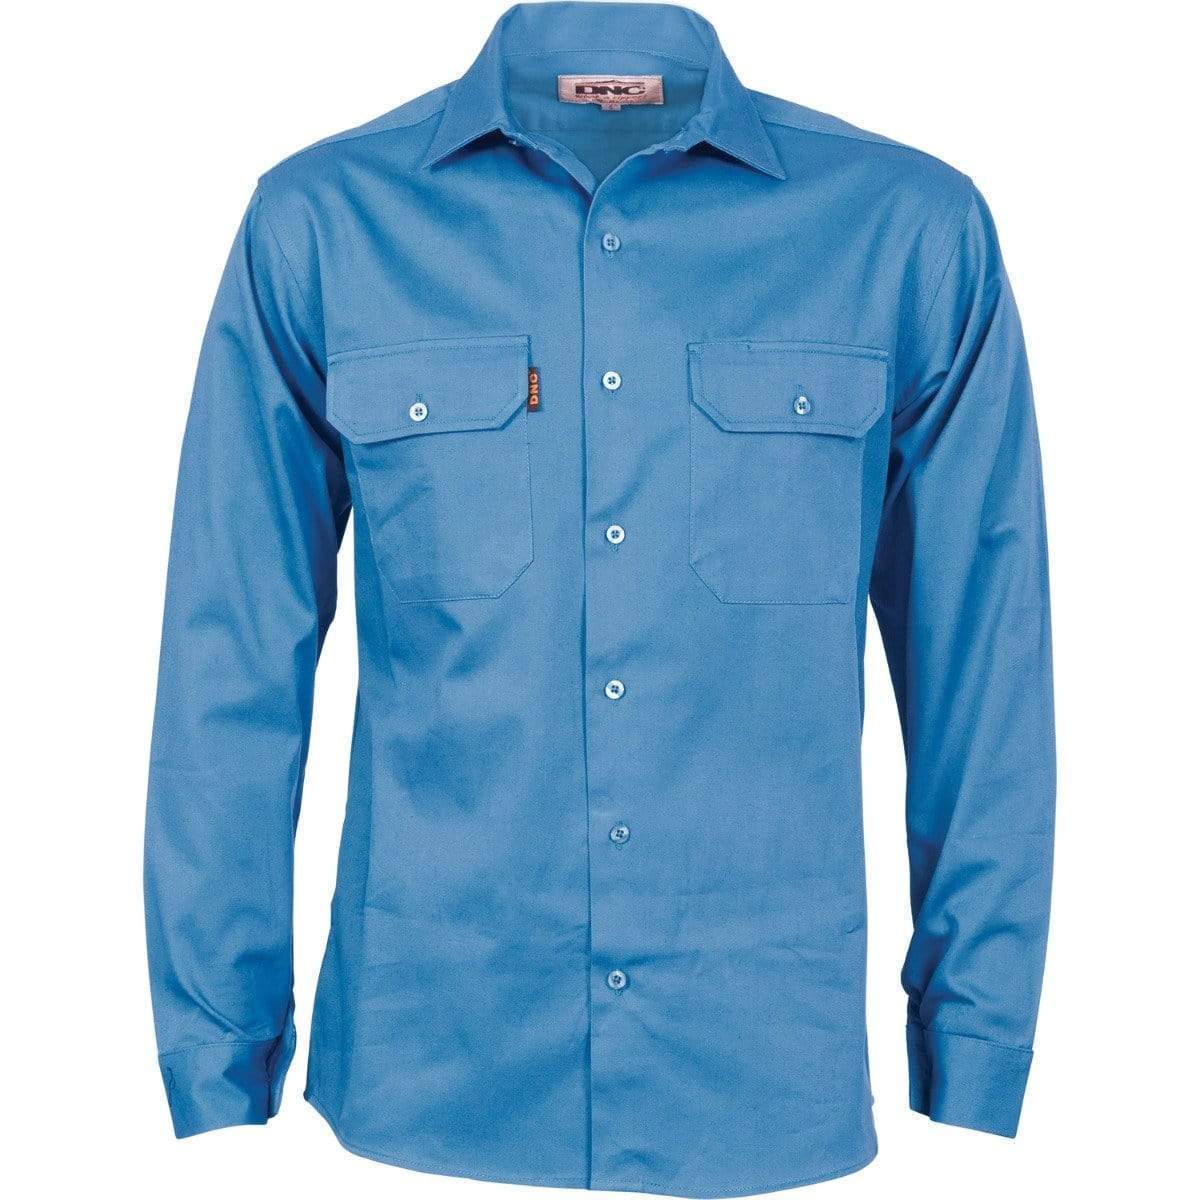 Dnc Workwear 190 Gsm Cotton Drill Long Sleeve Work Shirt With Gusset Sleeve - 3209 Work Wear DNC Workwear Sky S 